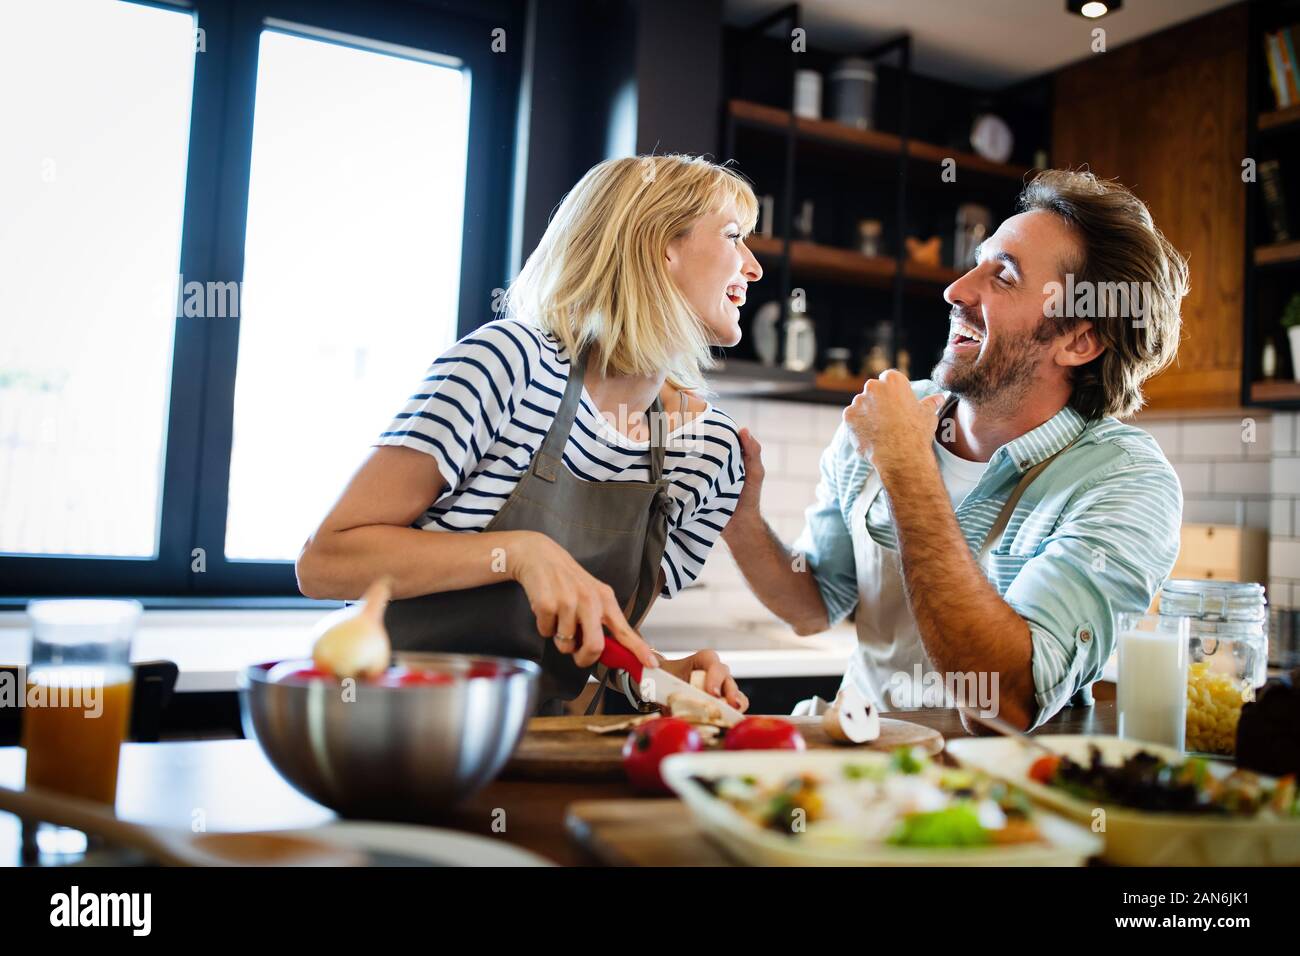 Beautiful young couple is talking and smiling while cooking healthy food in kitchen at home Stock Photo